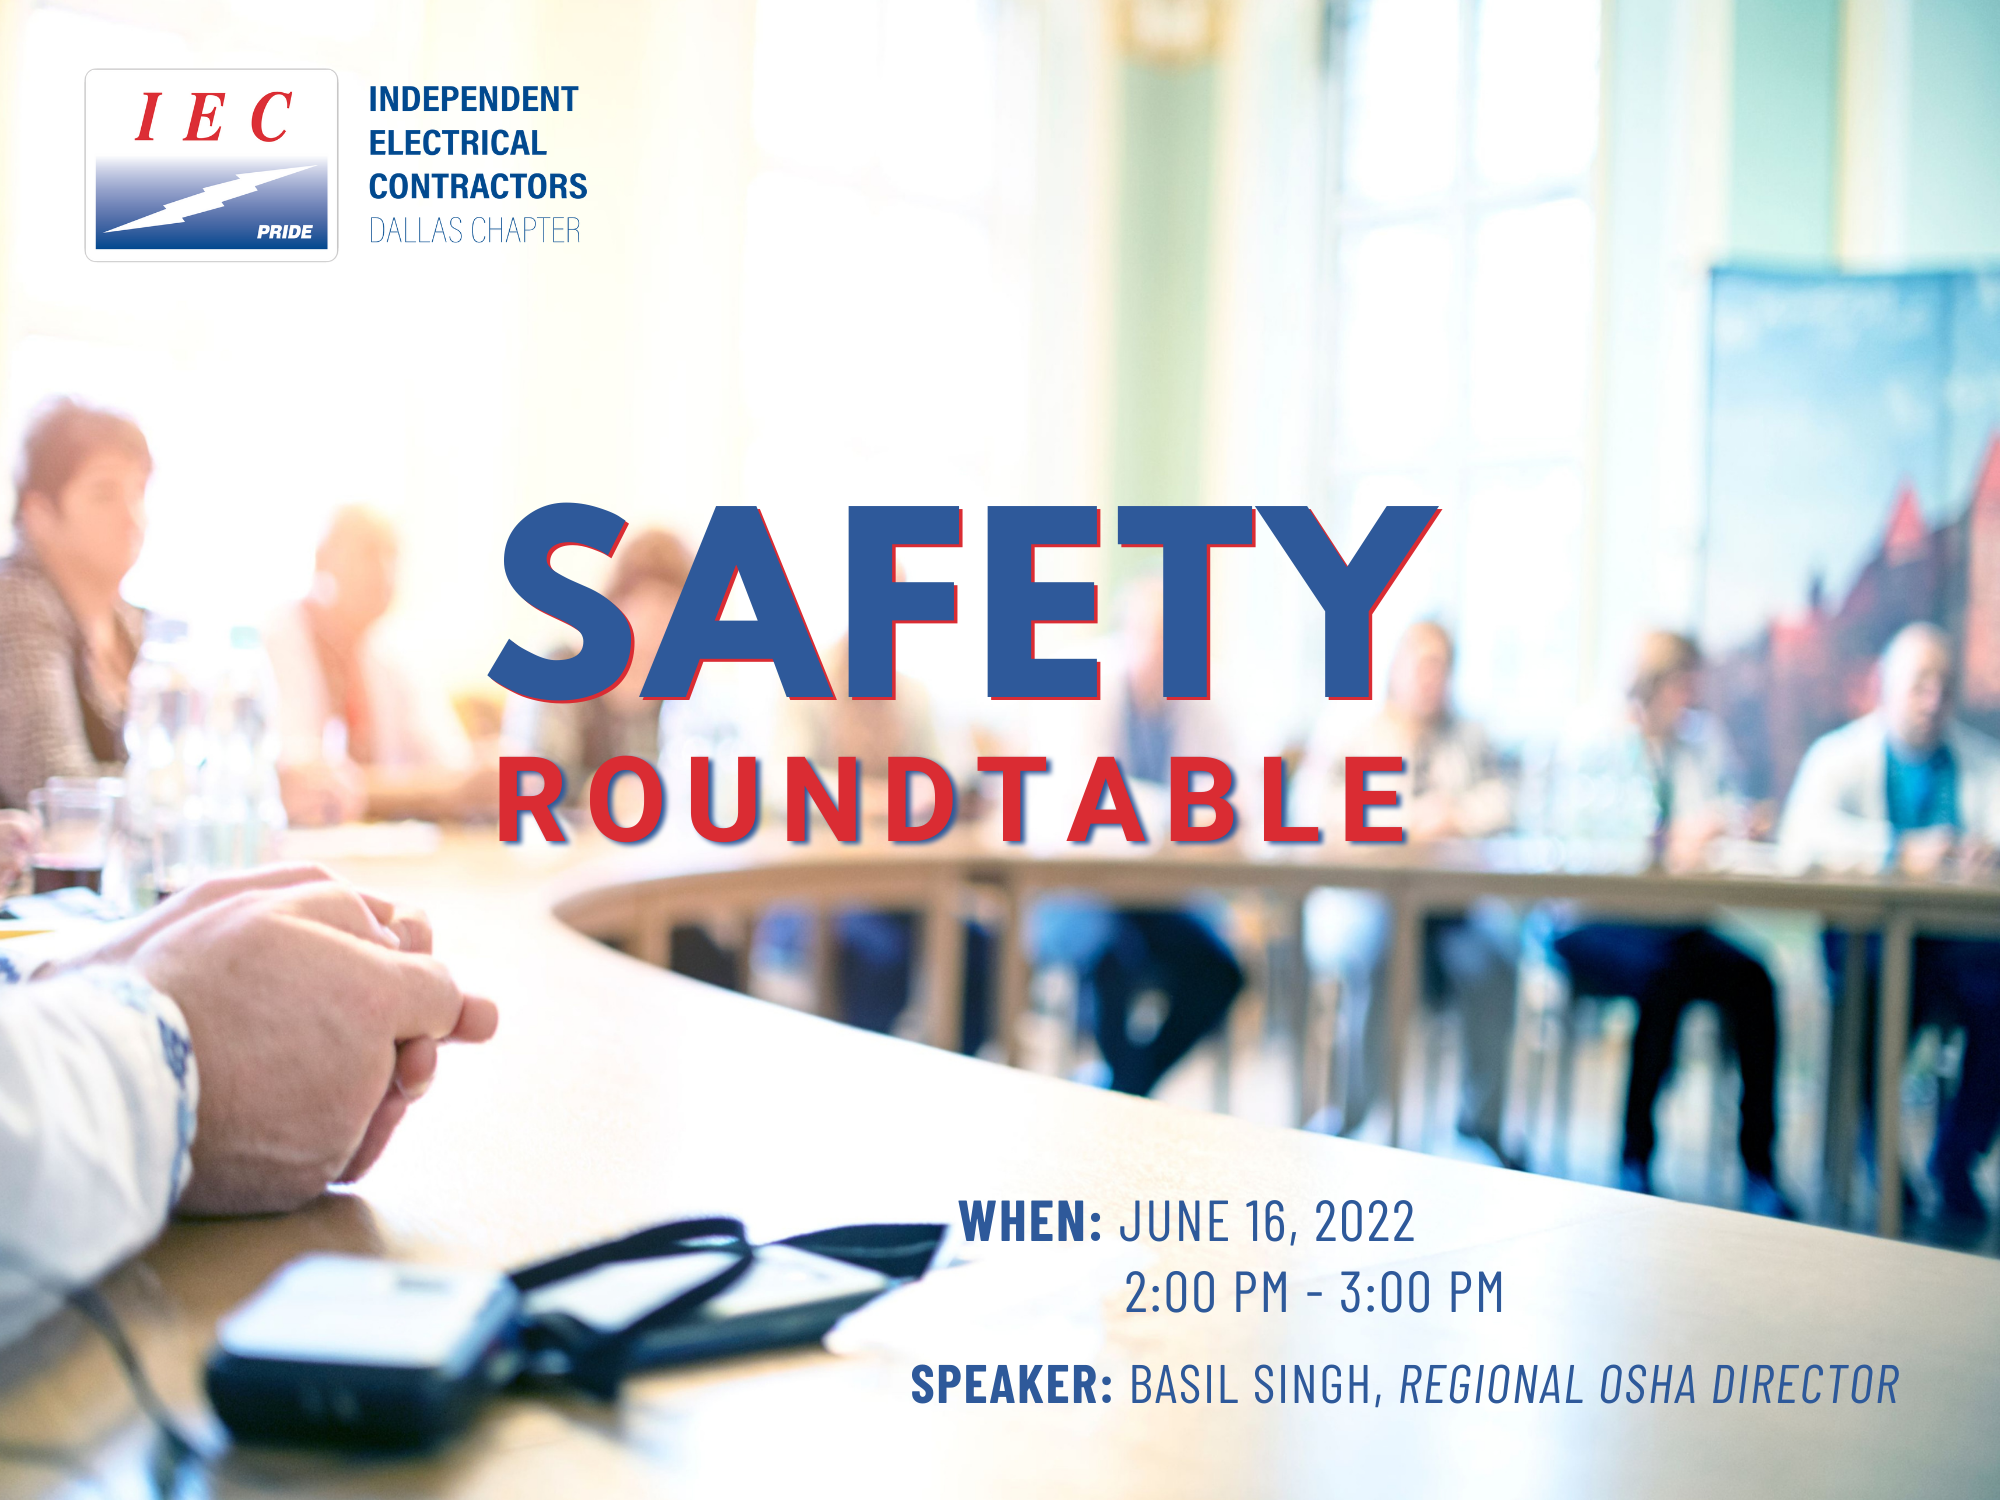 Safety Roundtable - June 16, 2022